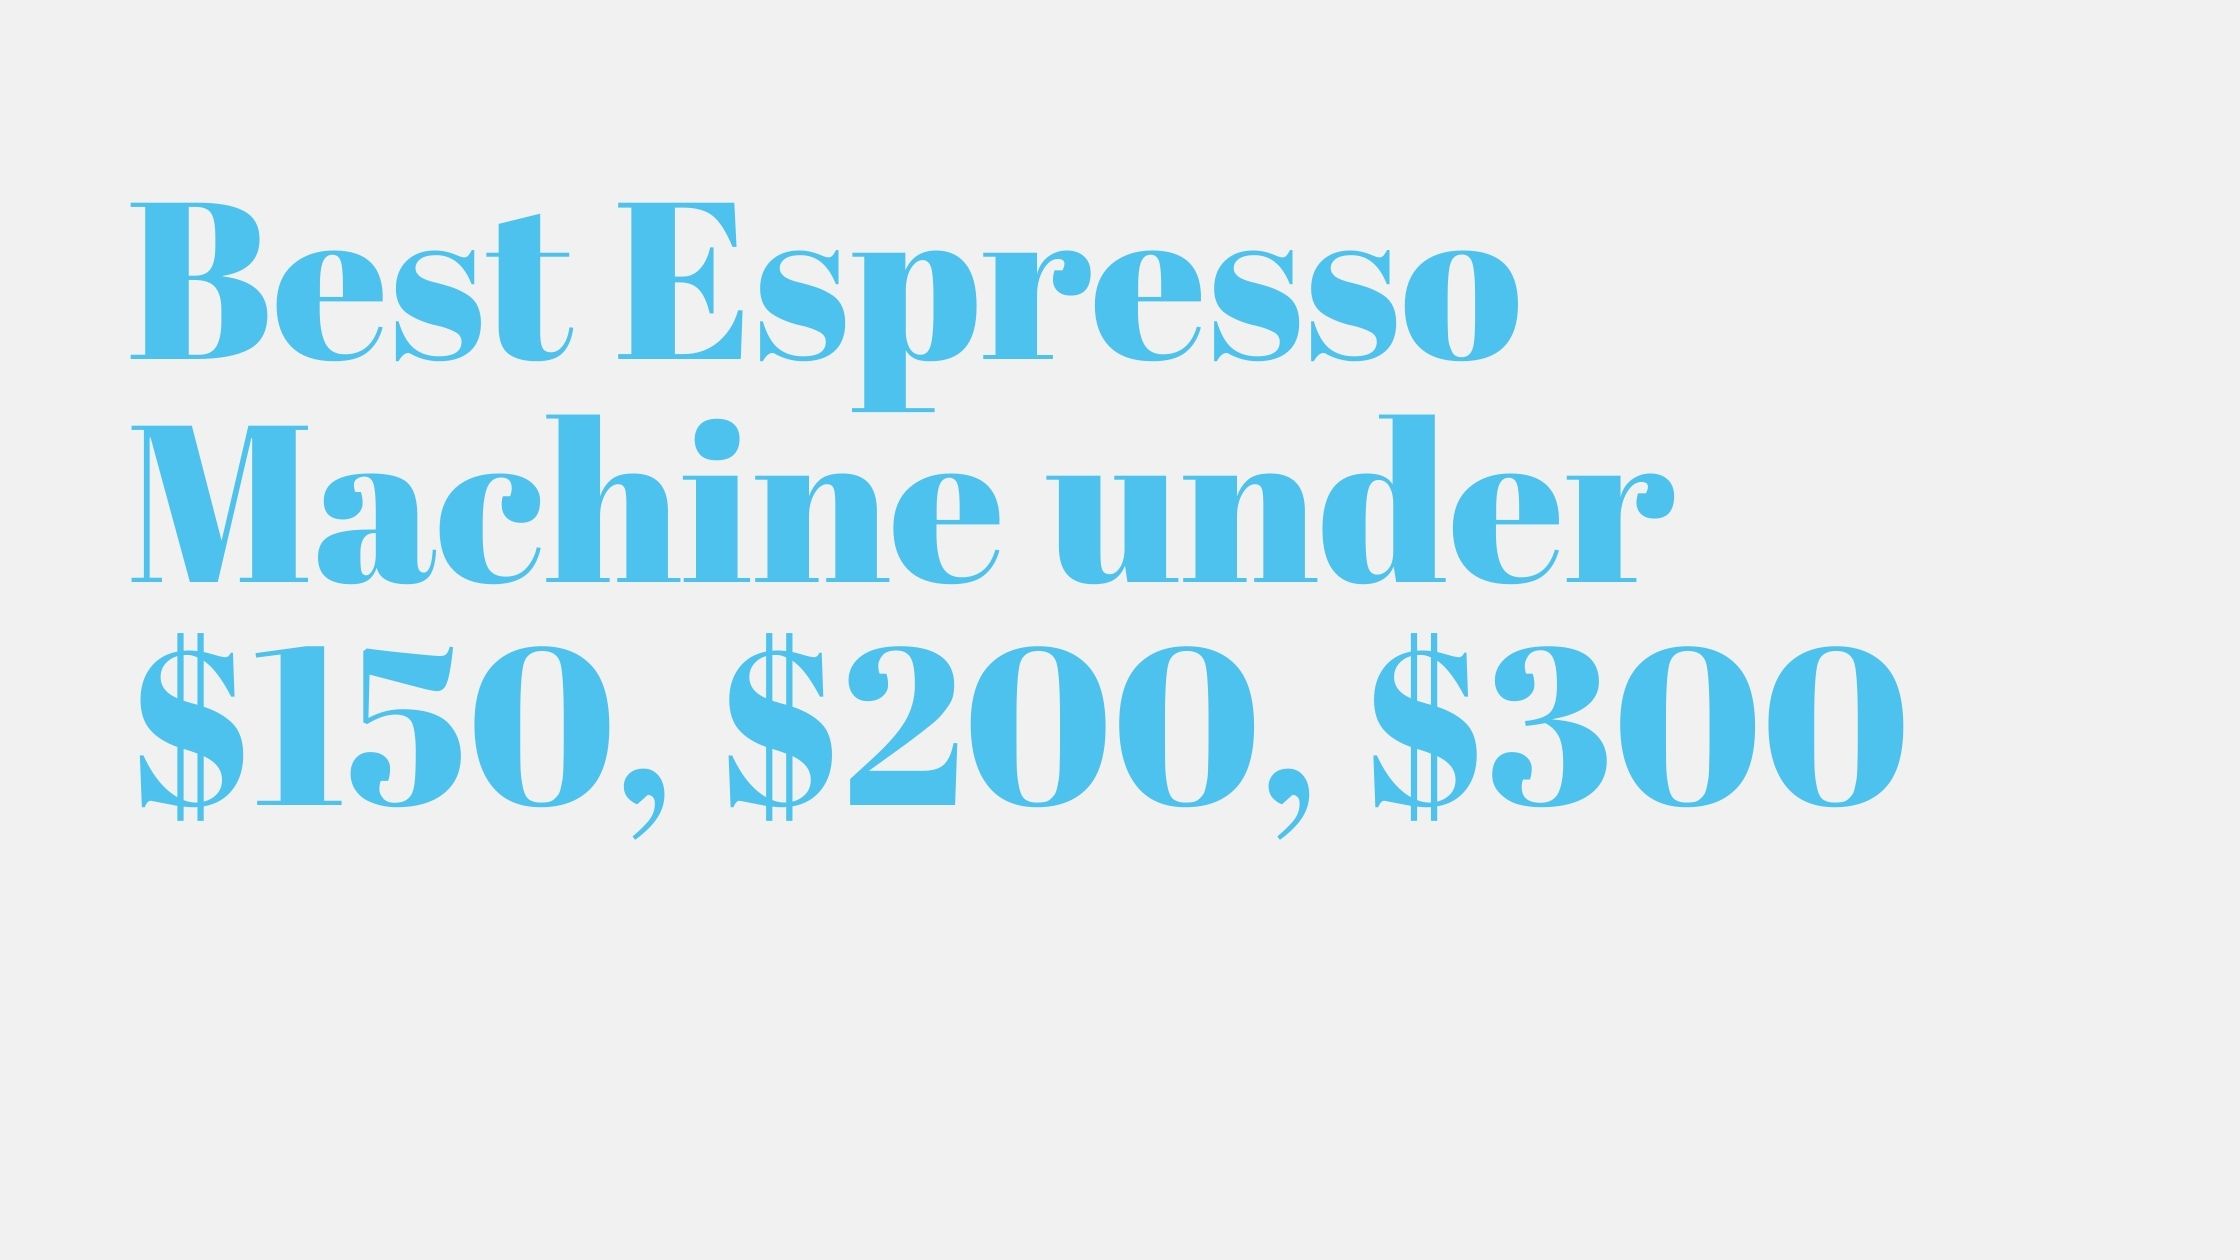 You are currently viewing 11 Best Espresso Machine under $150, $200, $300